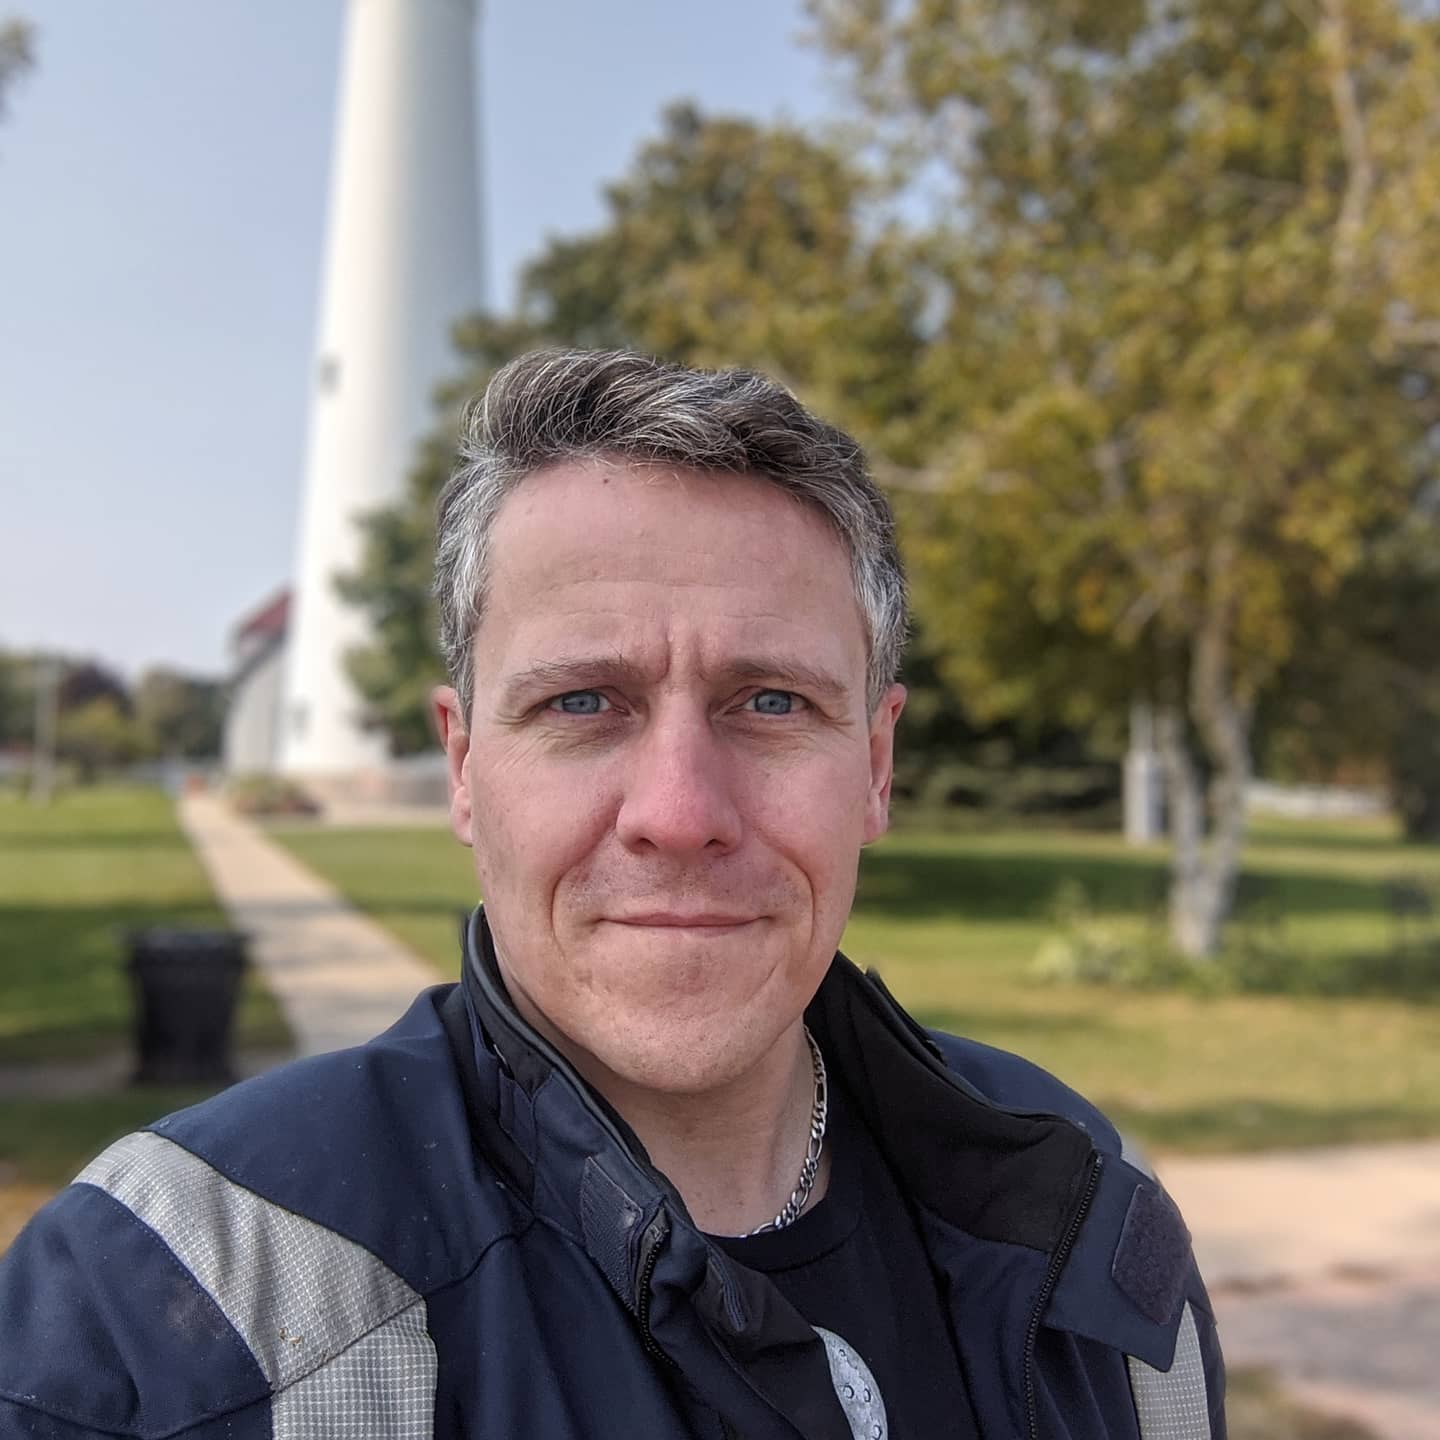 Apparently this didn't upload yesterday due to data service being shit... But a quick selfie at the Wind Point Lighthouse where I stopped for a light lunch. #roadtrip #motorrad #wisconsin